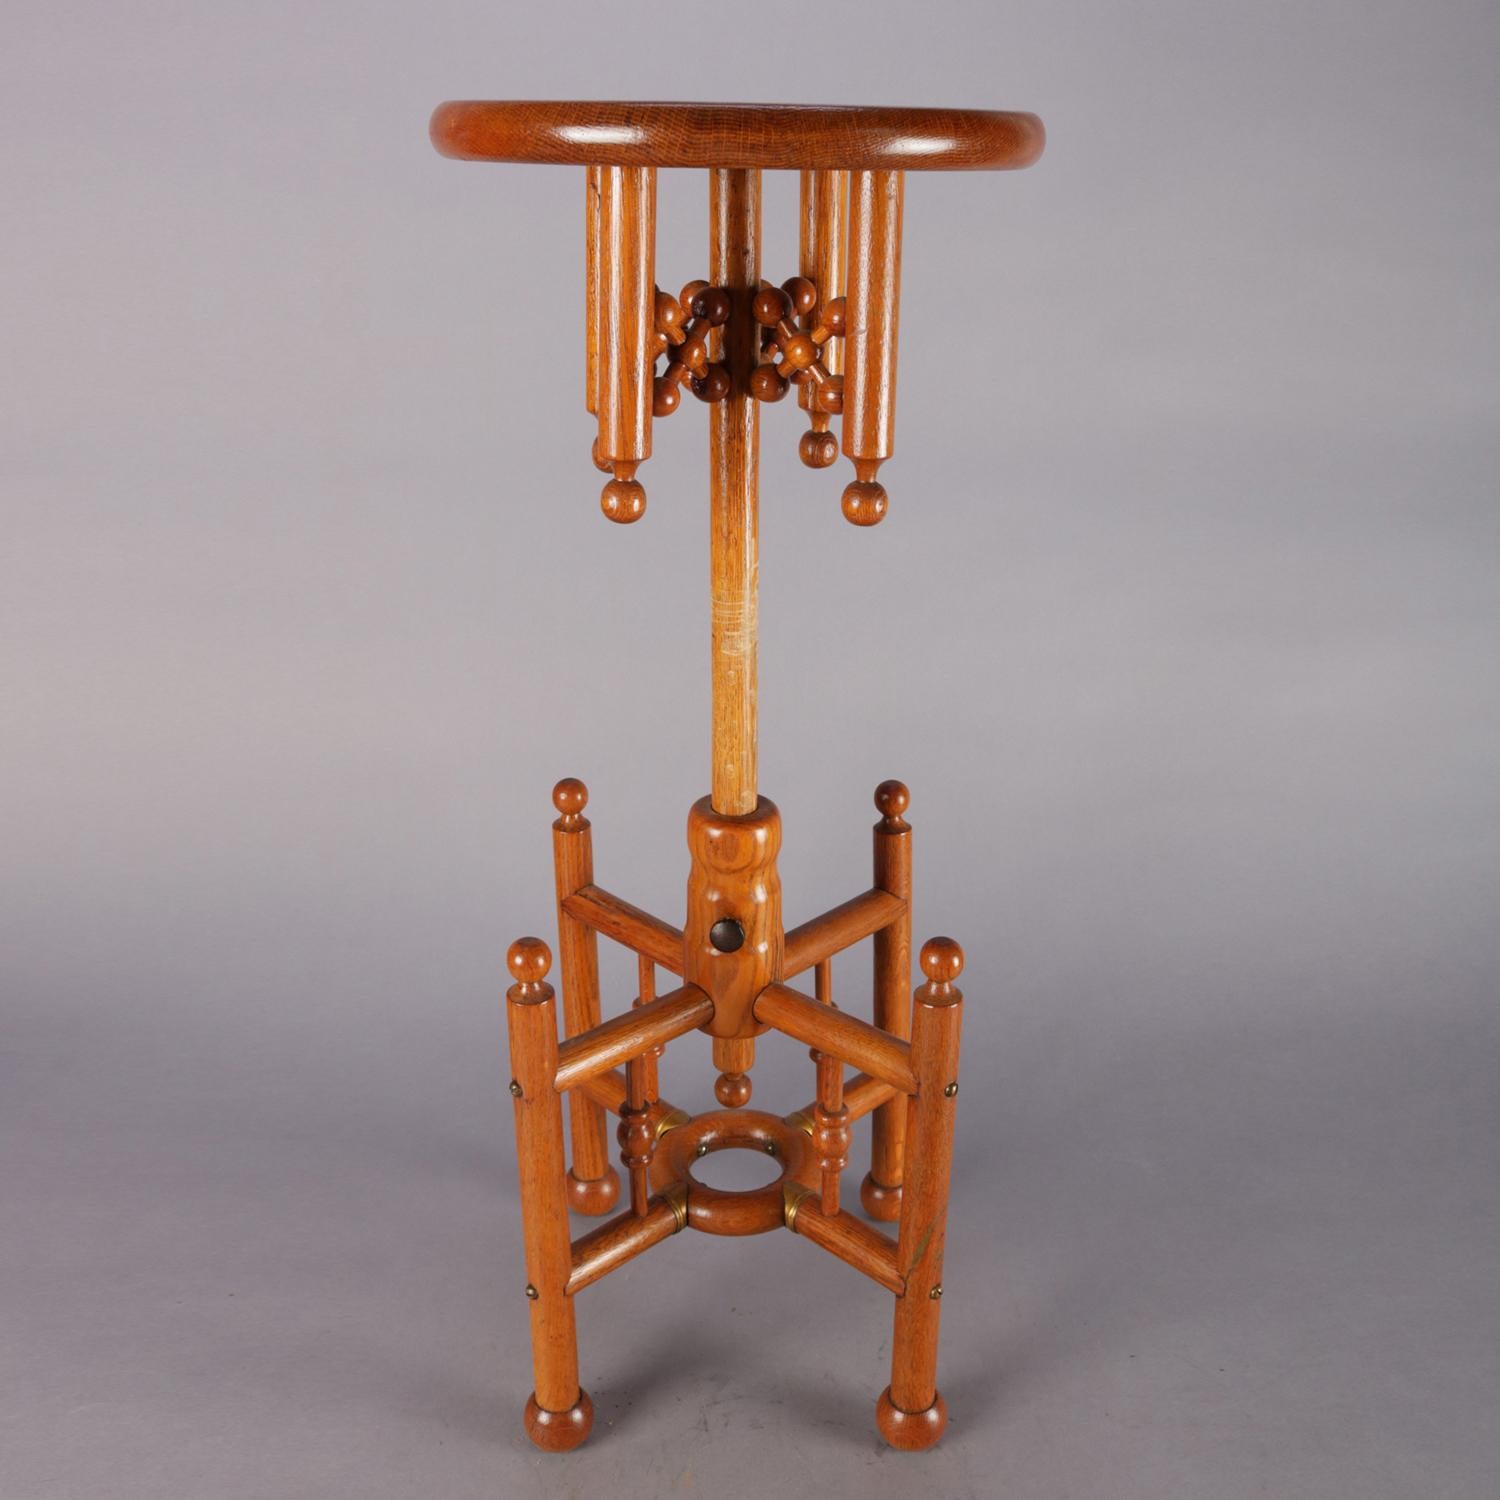 Victorian Antique Carved Oak Stick and Ball Adjustable Piano Stool, circa 1880